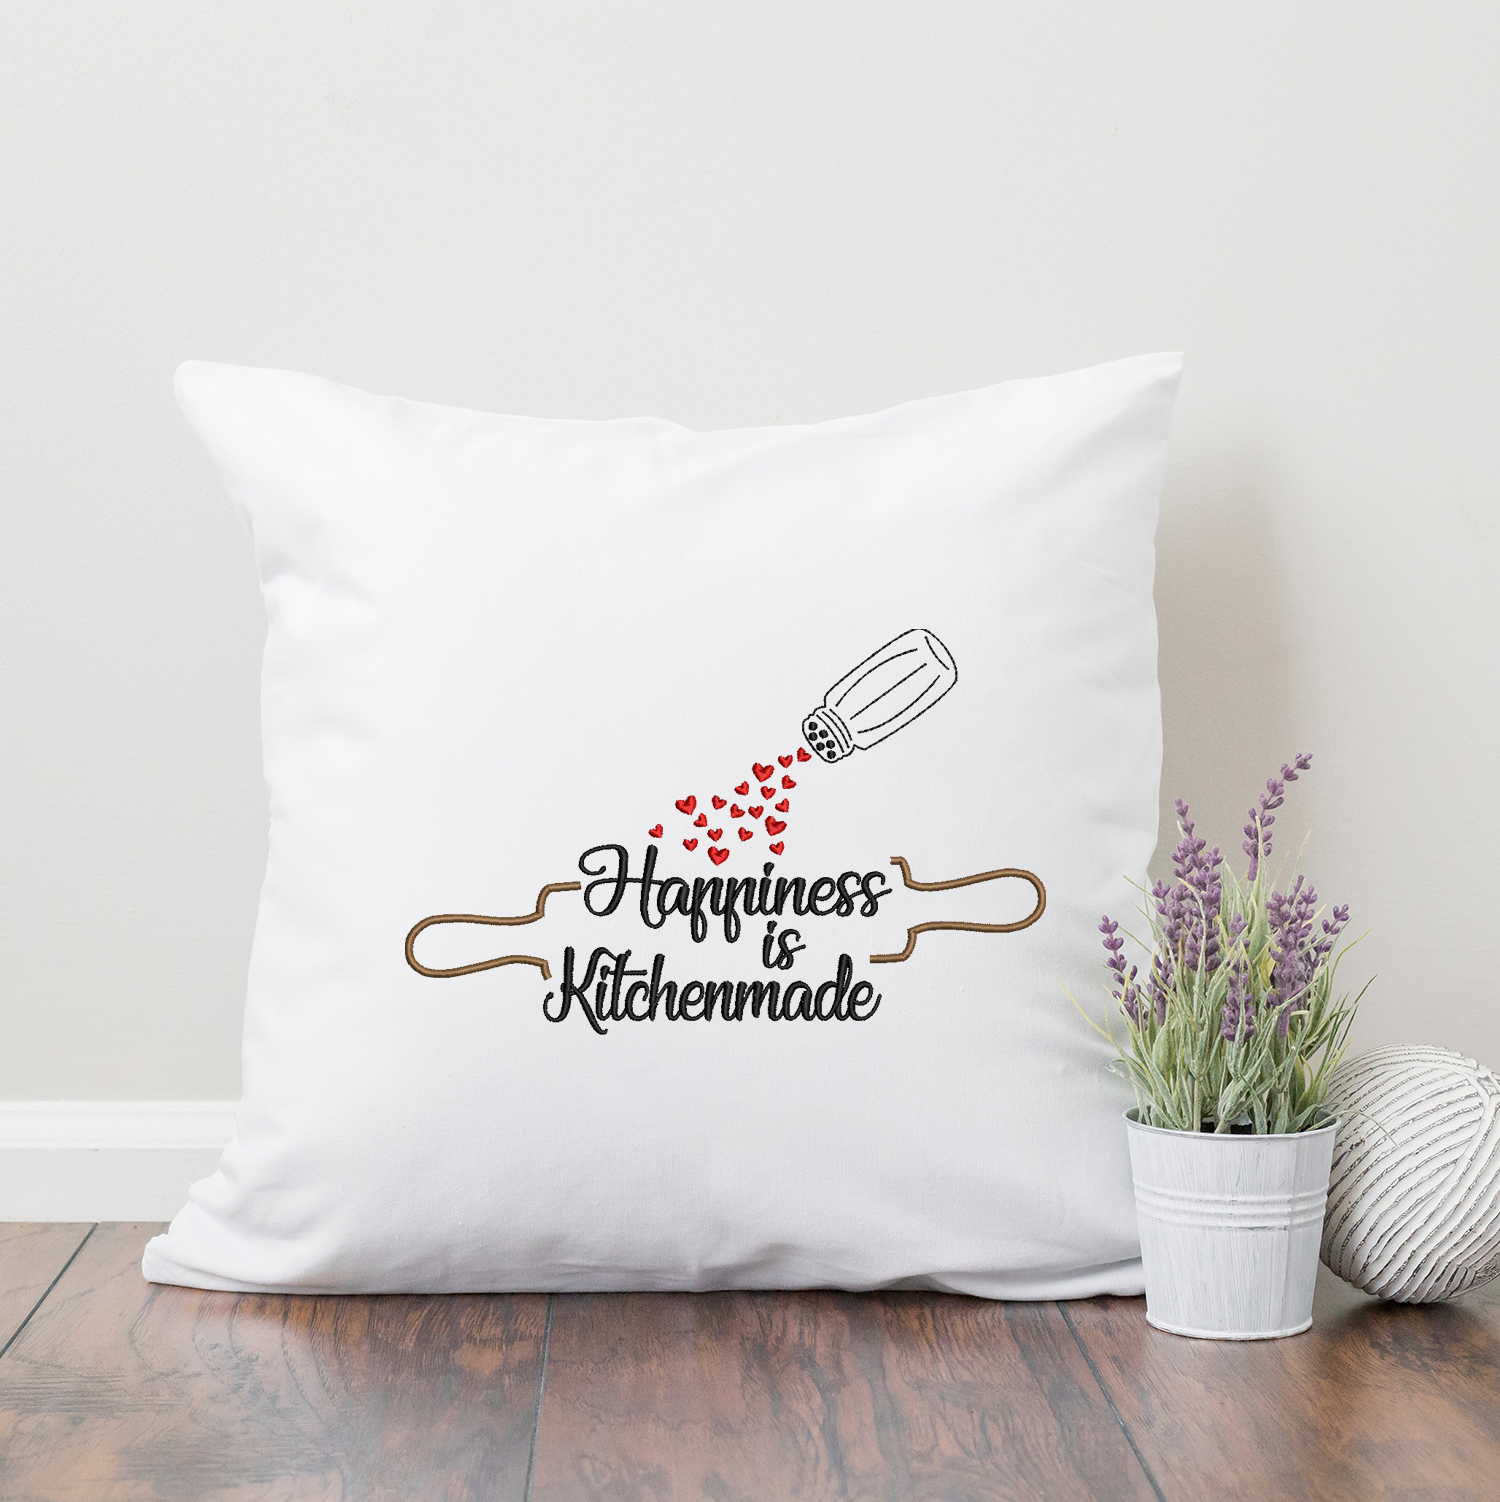 Happiness is Kitchenmade 2020 Embroidery Design - Oh My Crafty Supplies Inc.